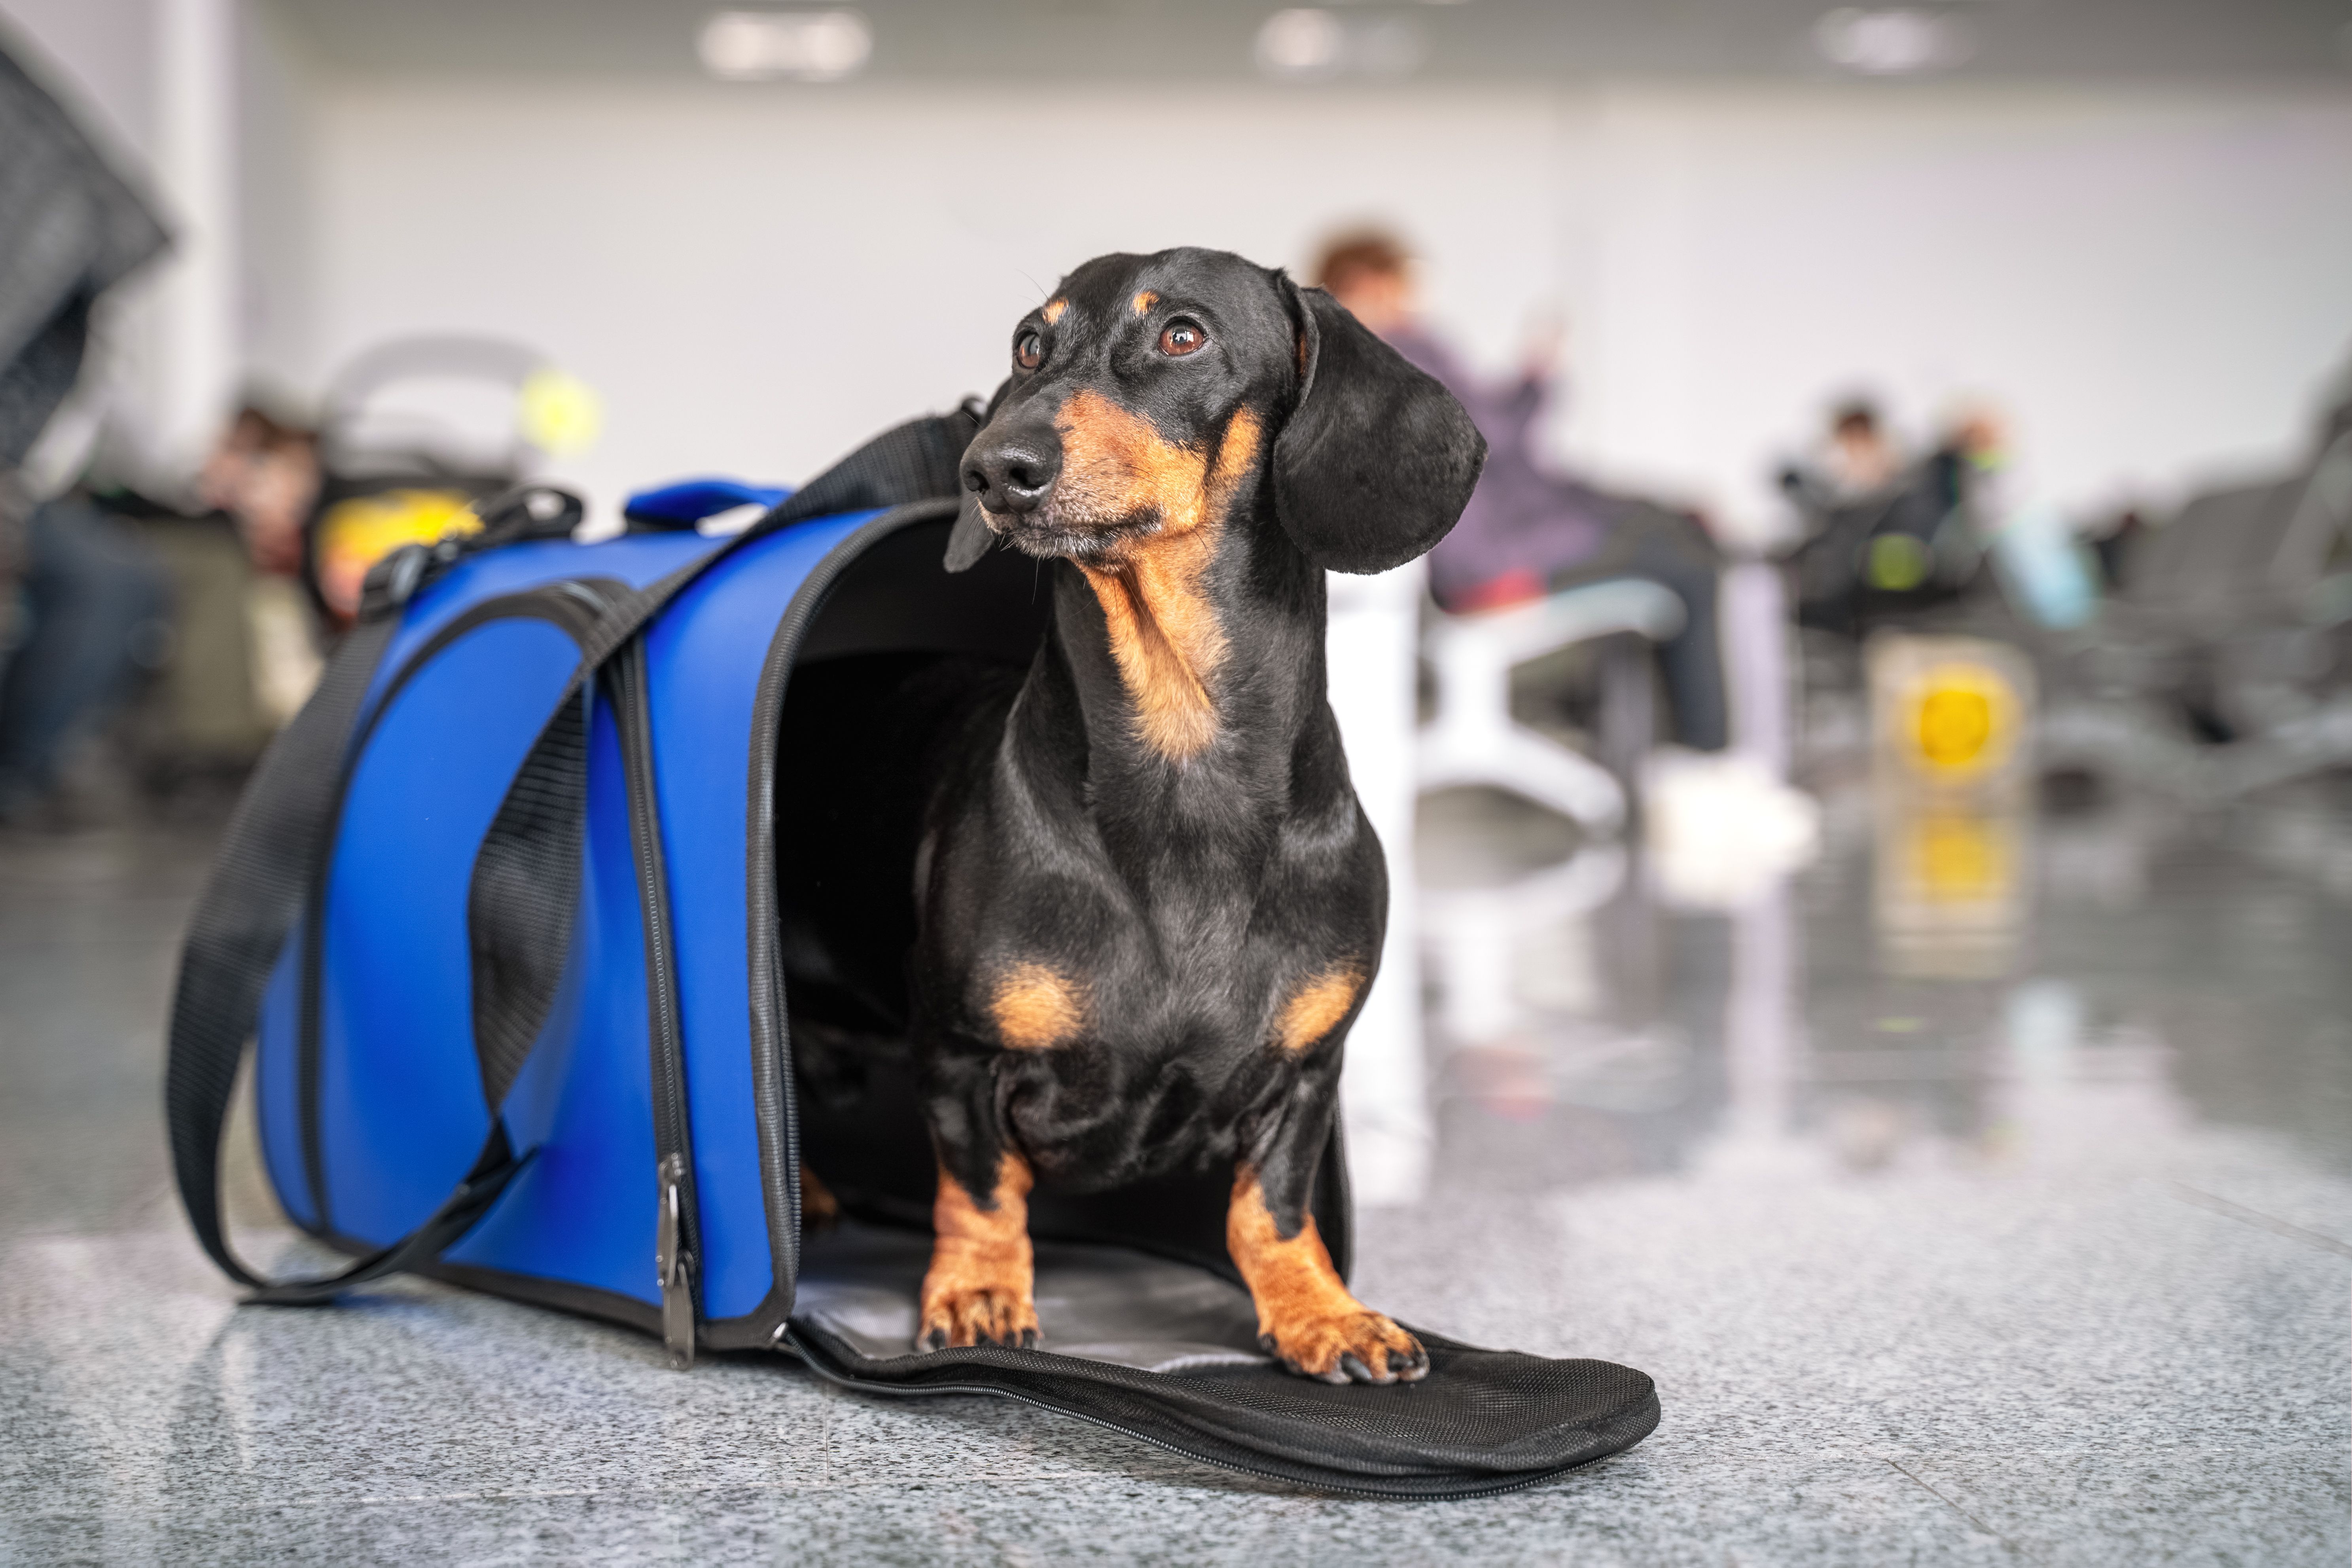 A Dog standing near an animal carrying bag in an airport.